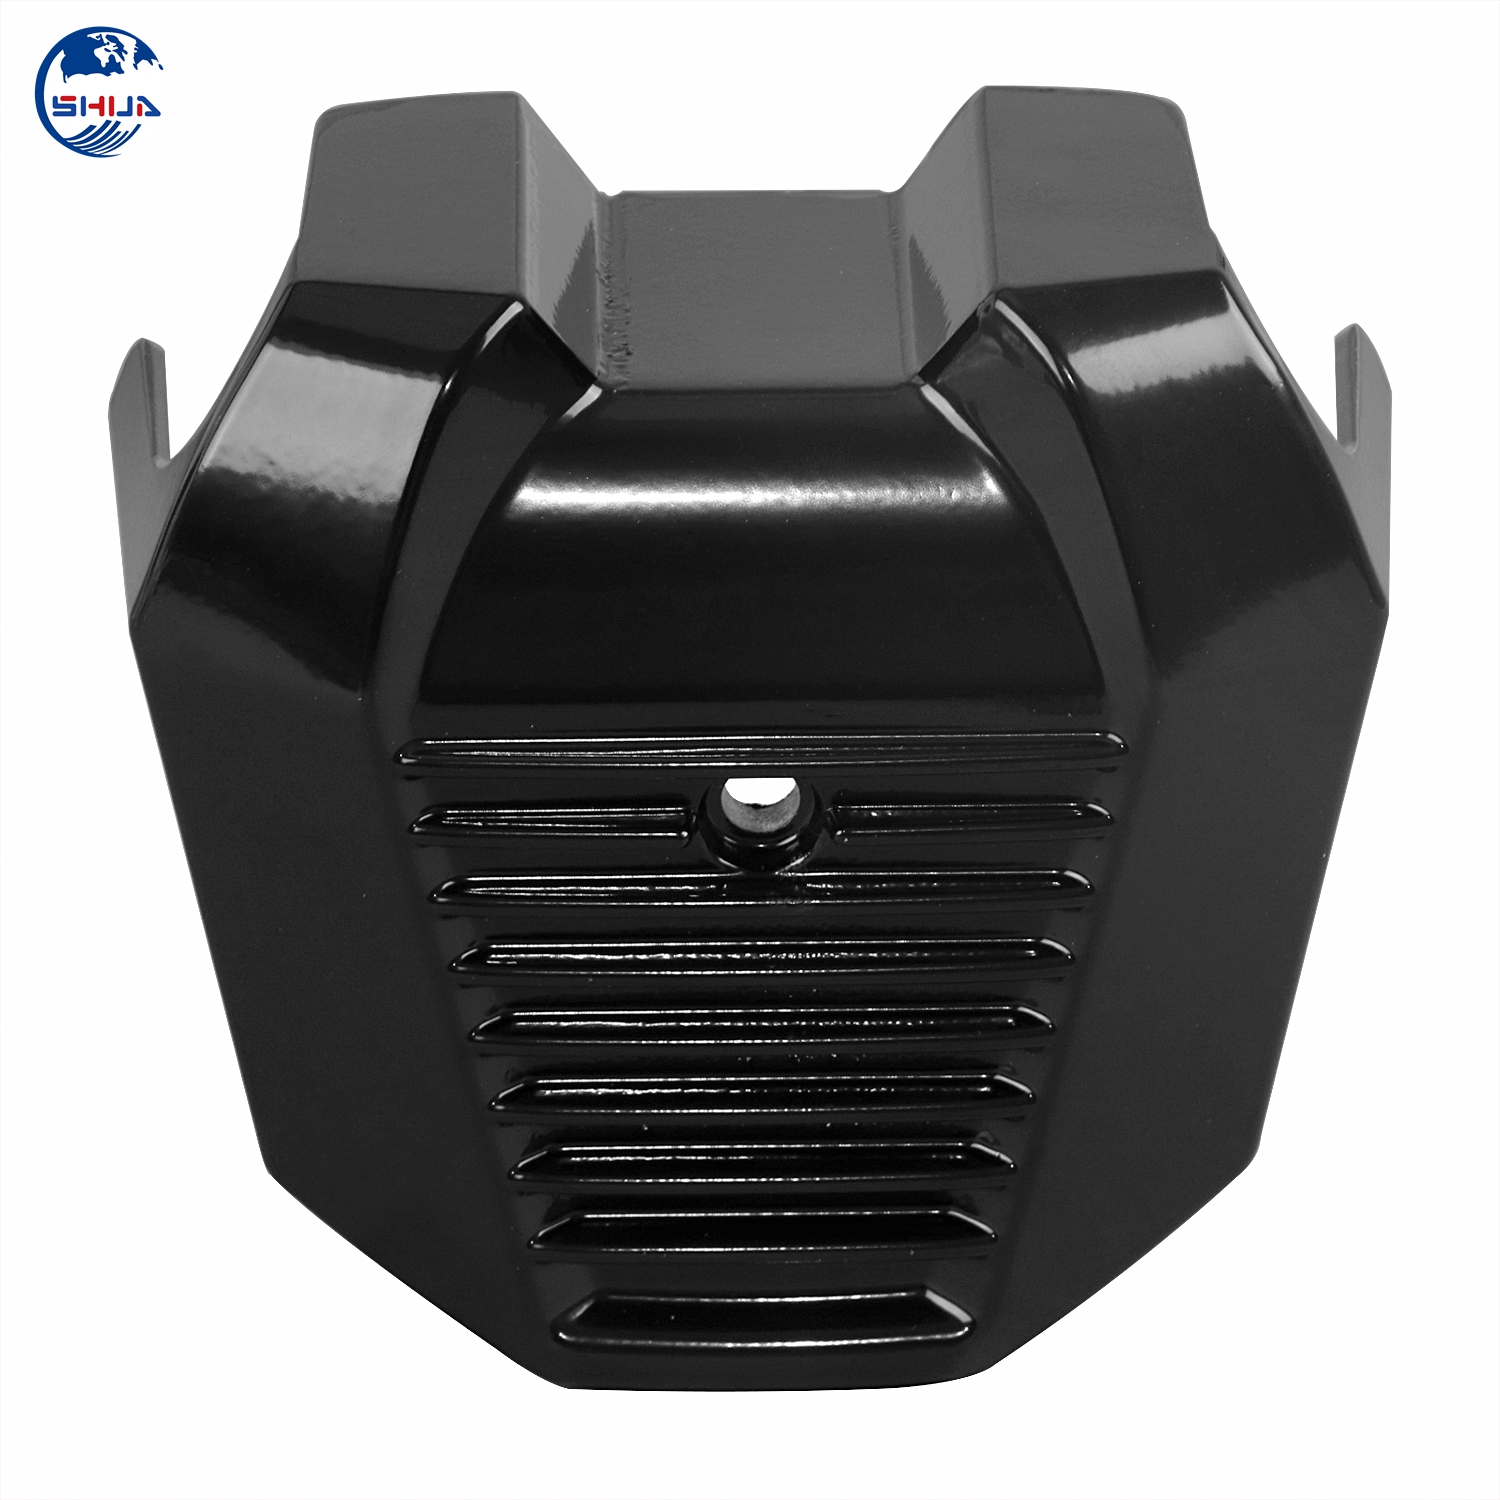 Aluminum Black Motorycle Finish Precision Coil Cover For Harley Softail Heritage Classic Sport Glide FLSB Street Bob FXBB FXDR